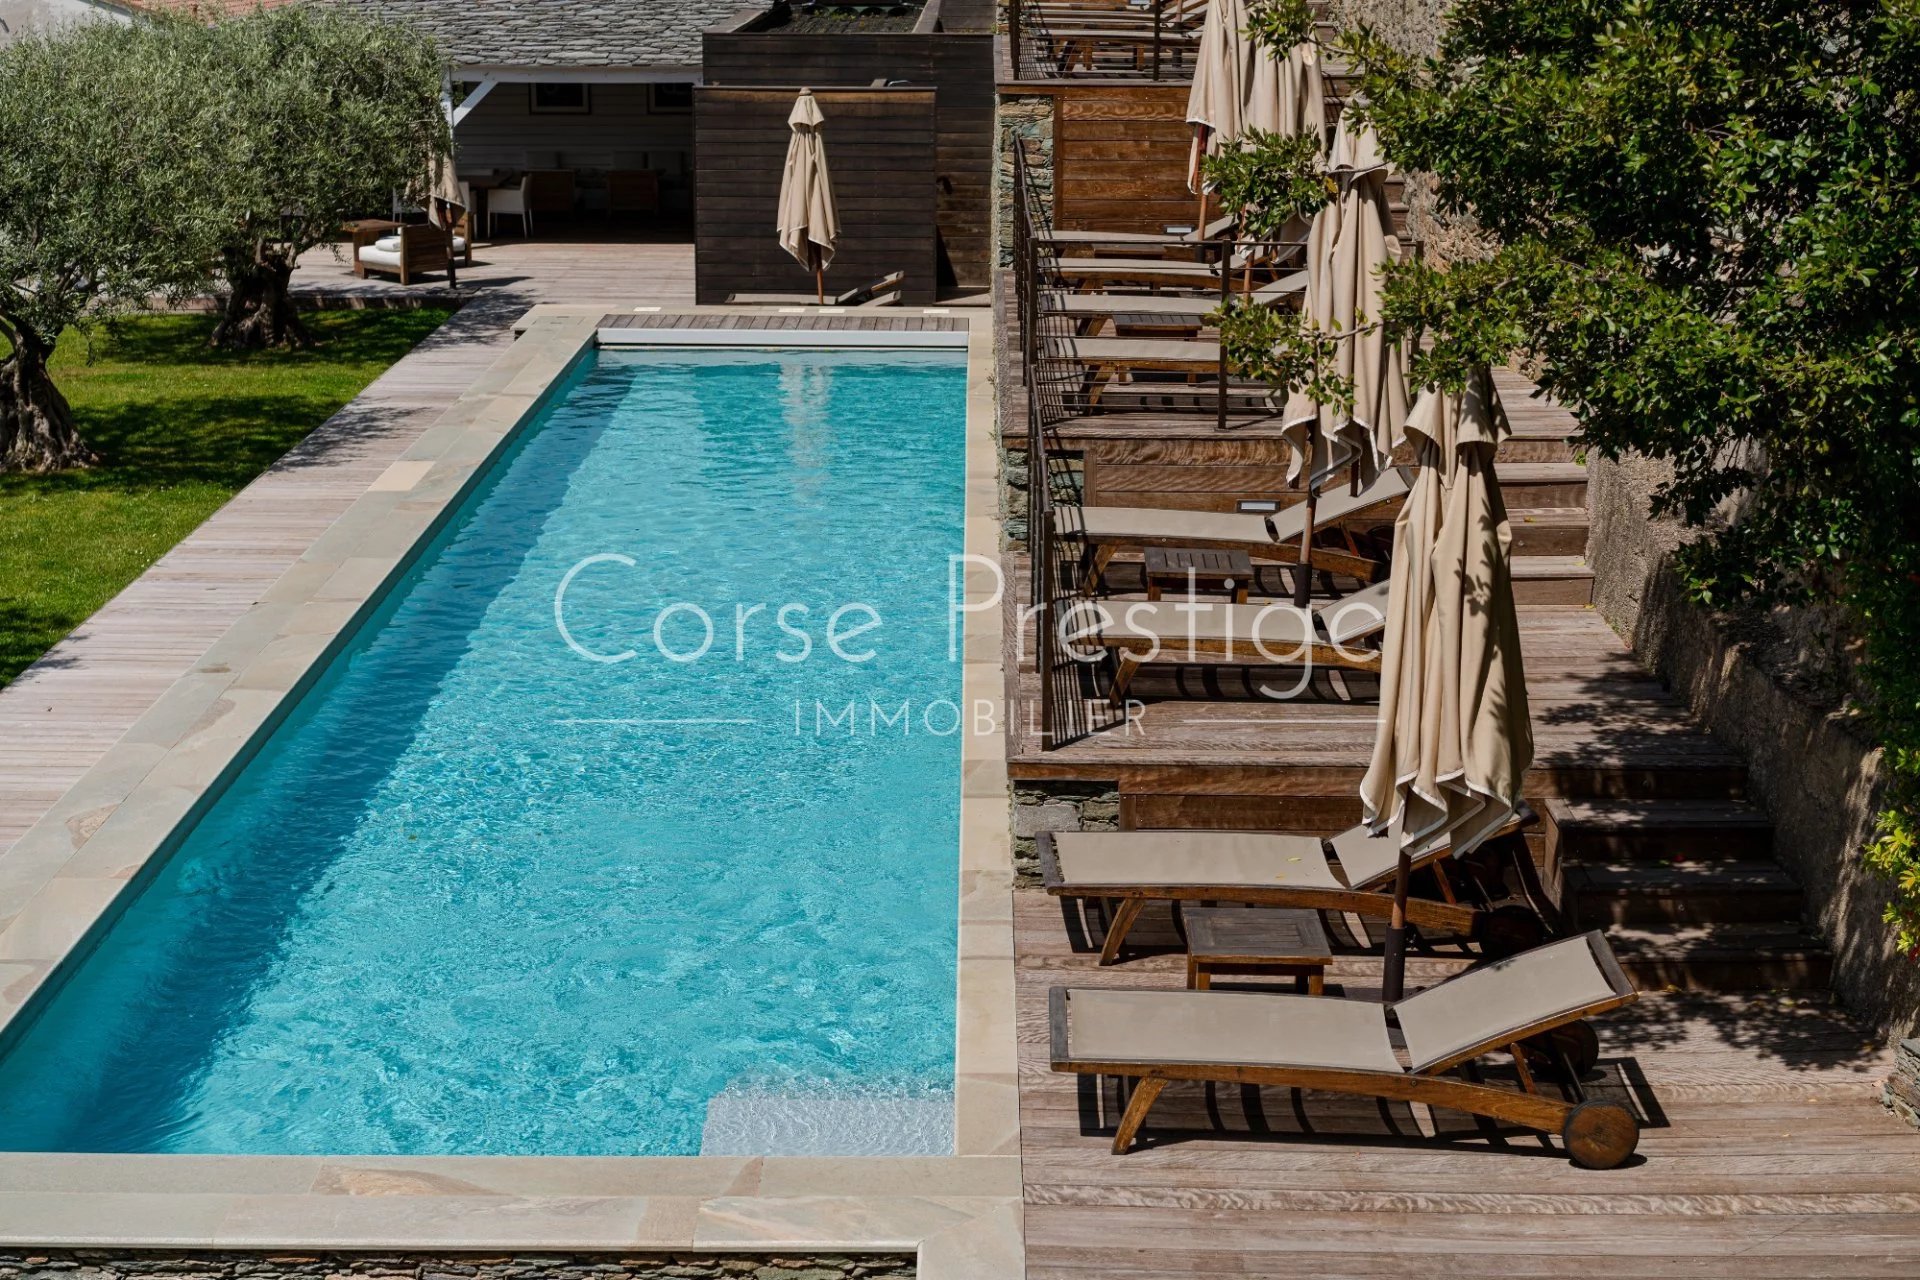 boutik hotel for sale in corsica - authentic mansion image3